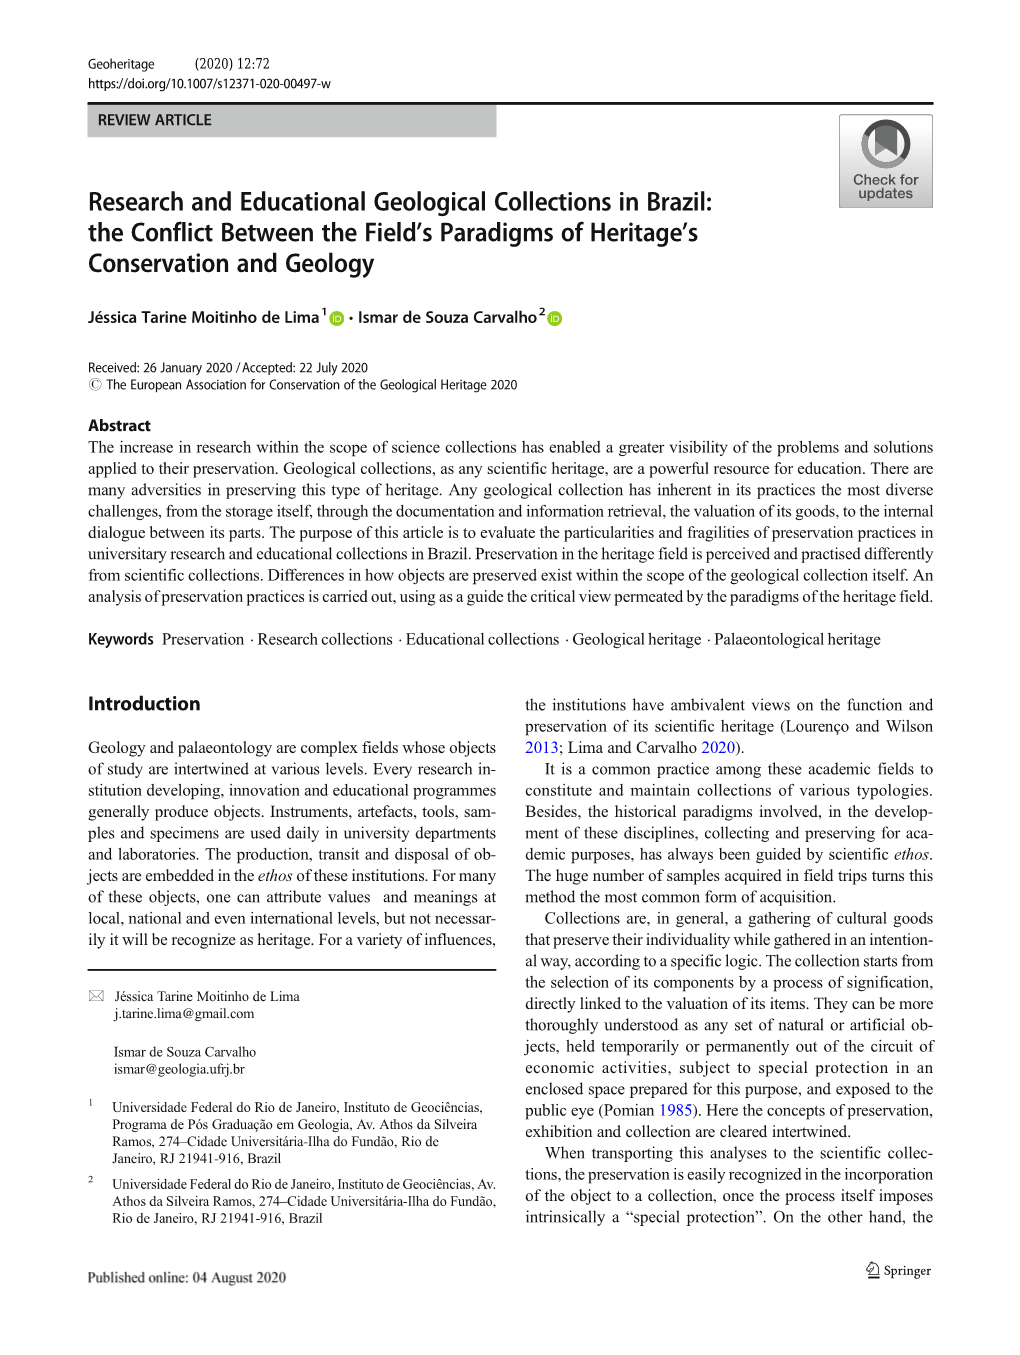 Research and Educational Geological Collections in Brazil: the Conflict Between the Field’S Paradigms of Heritage’S Conservation and Geology